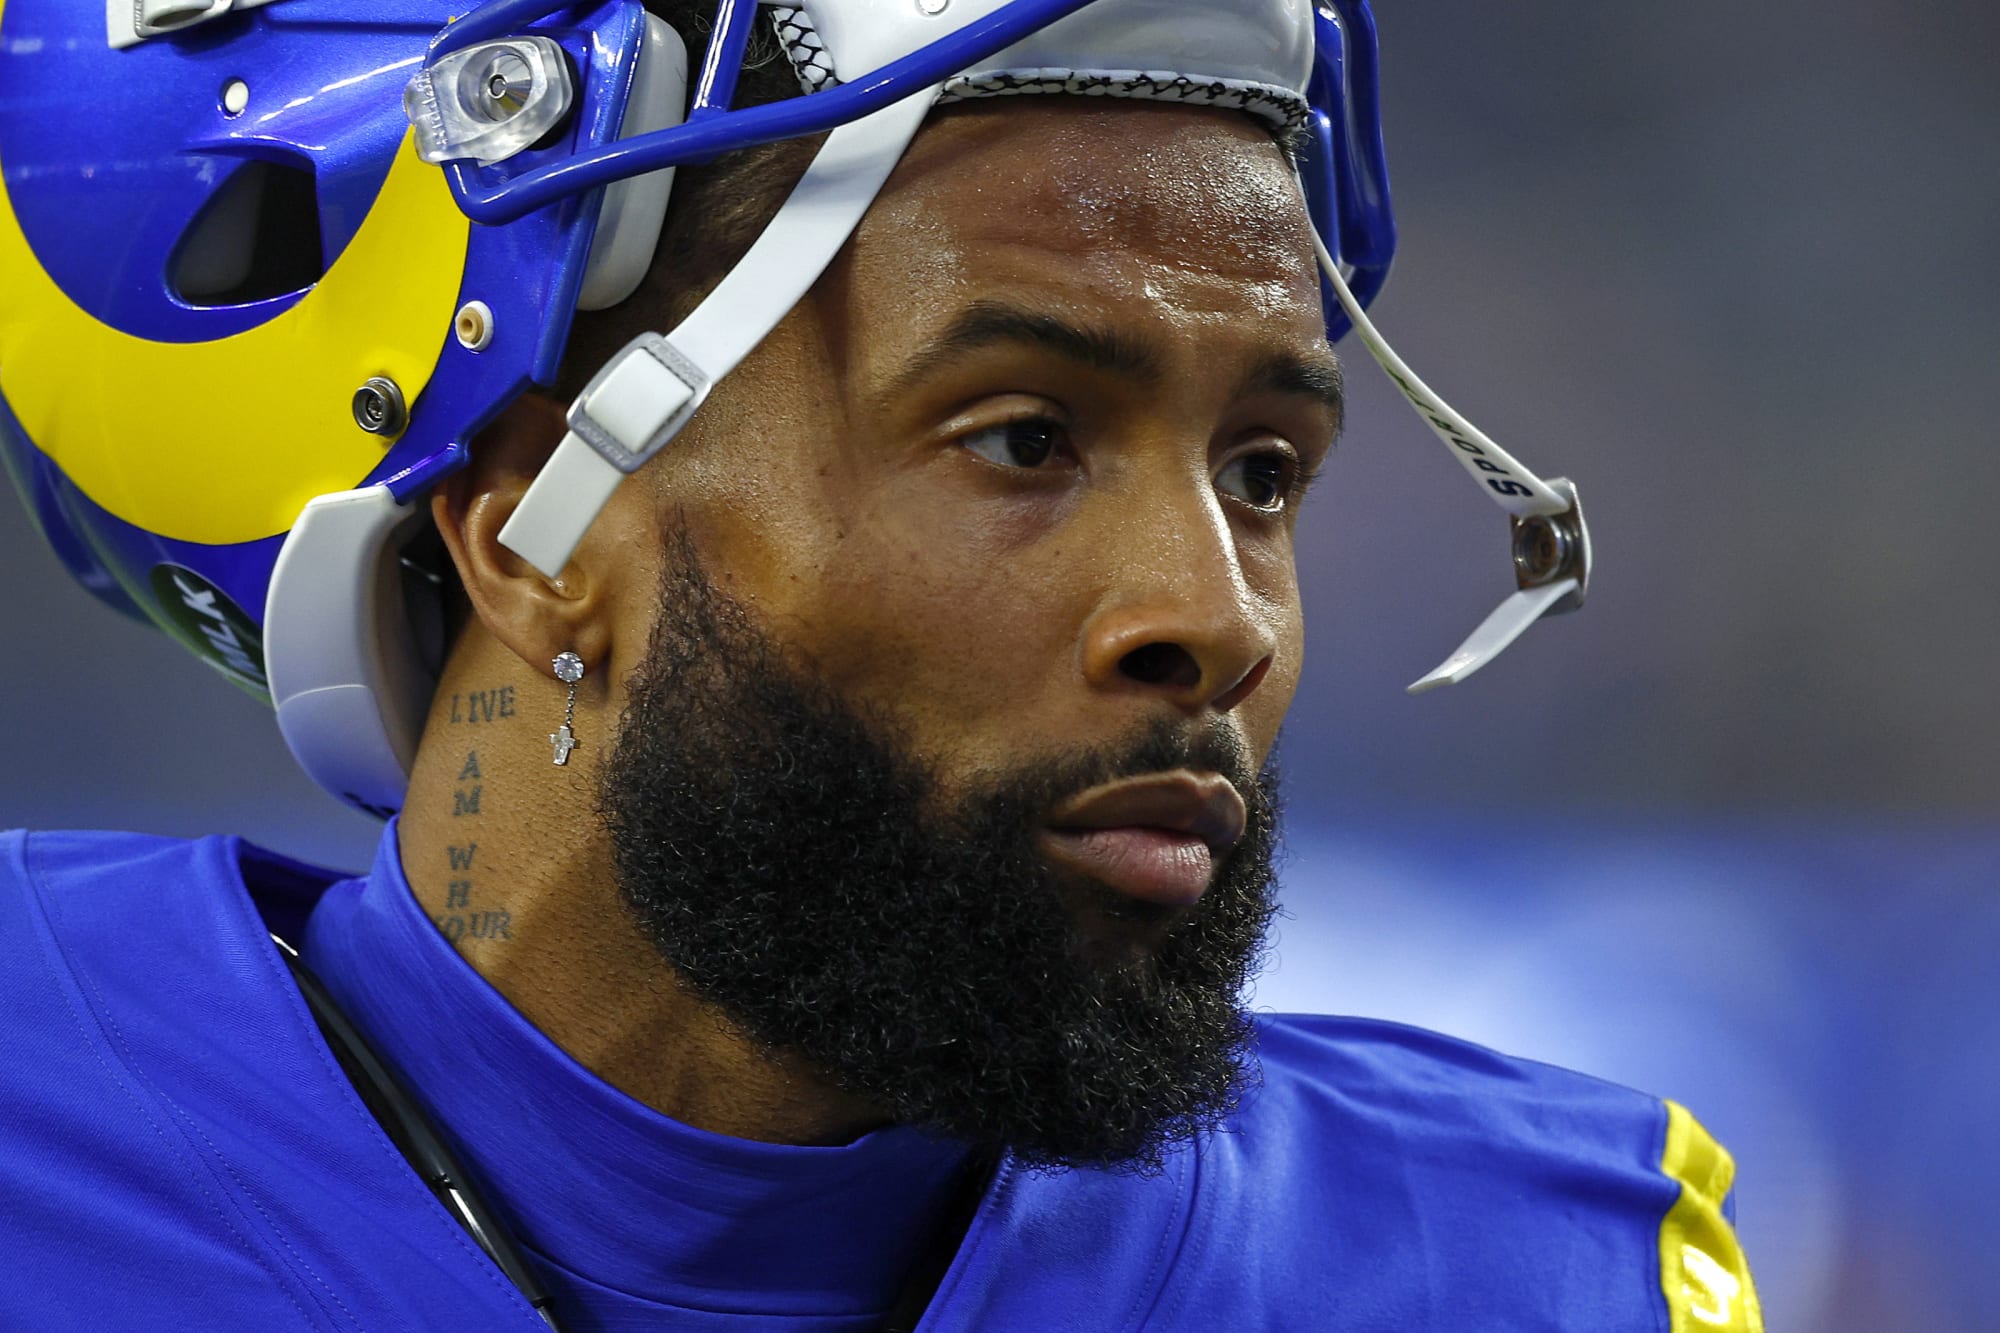 Odell Beckham Jr. Jets visit may indicate Aaron Rodgers trade is close